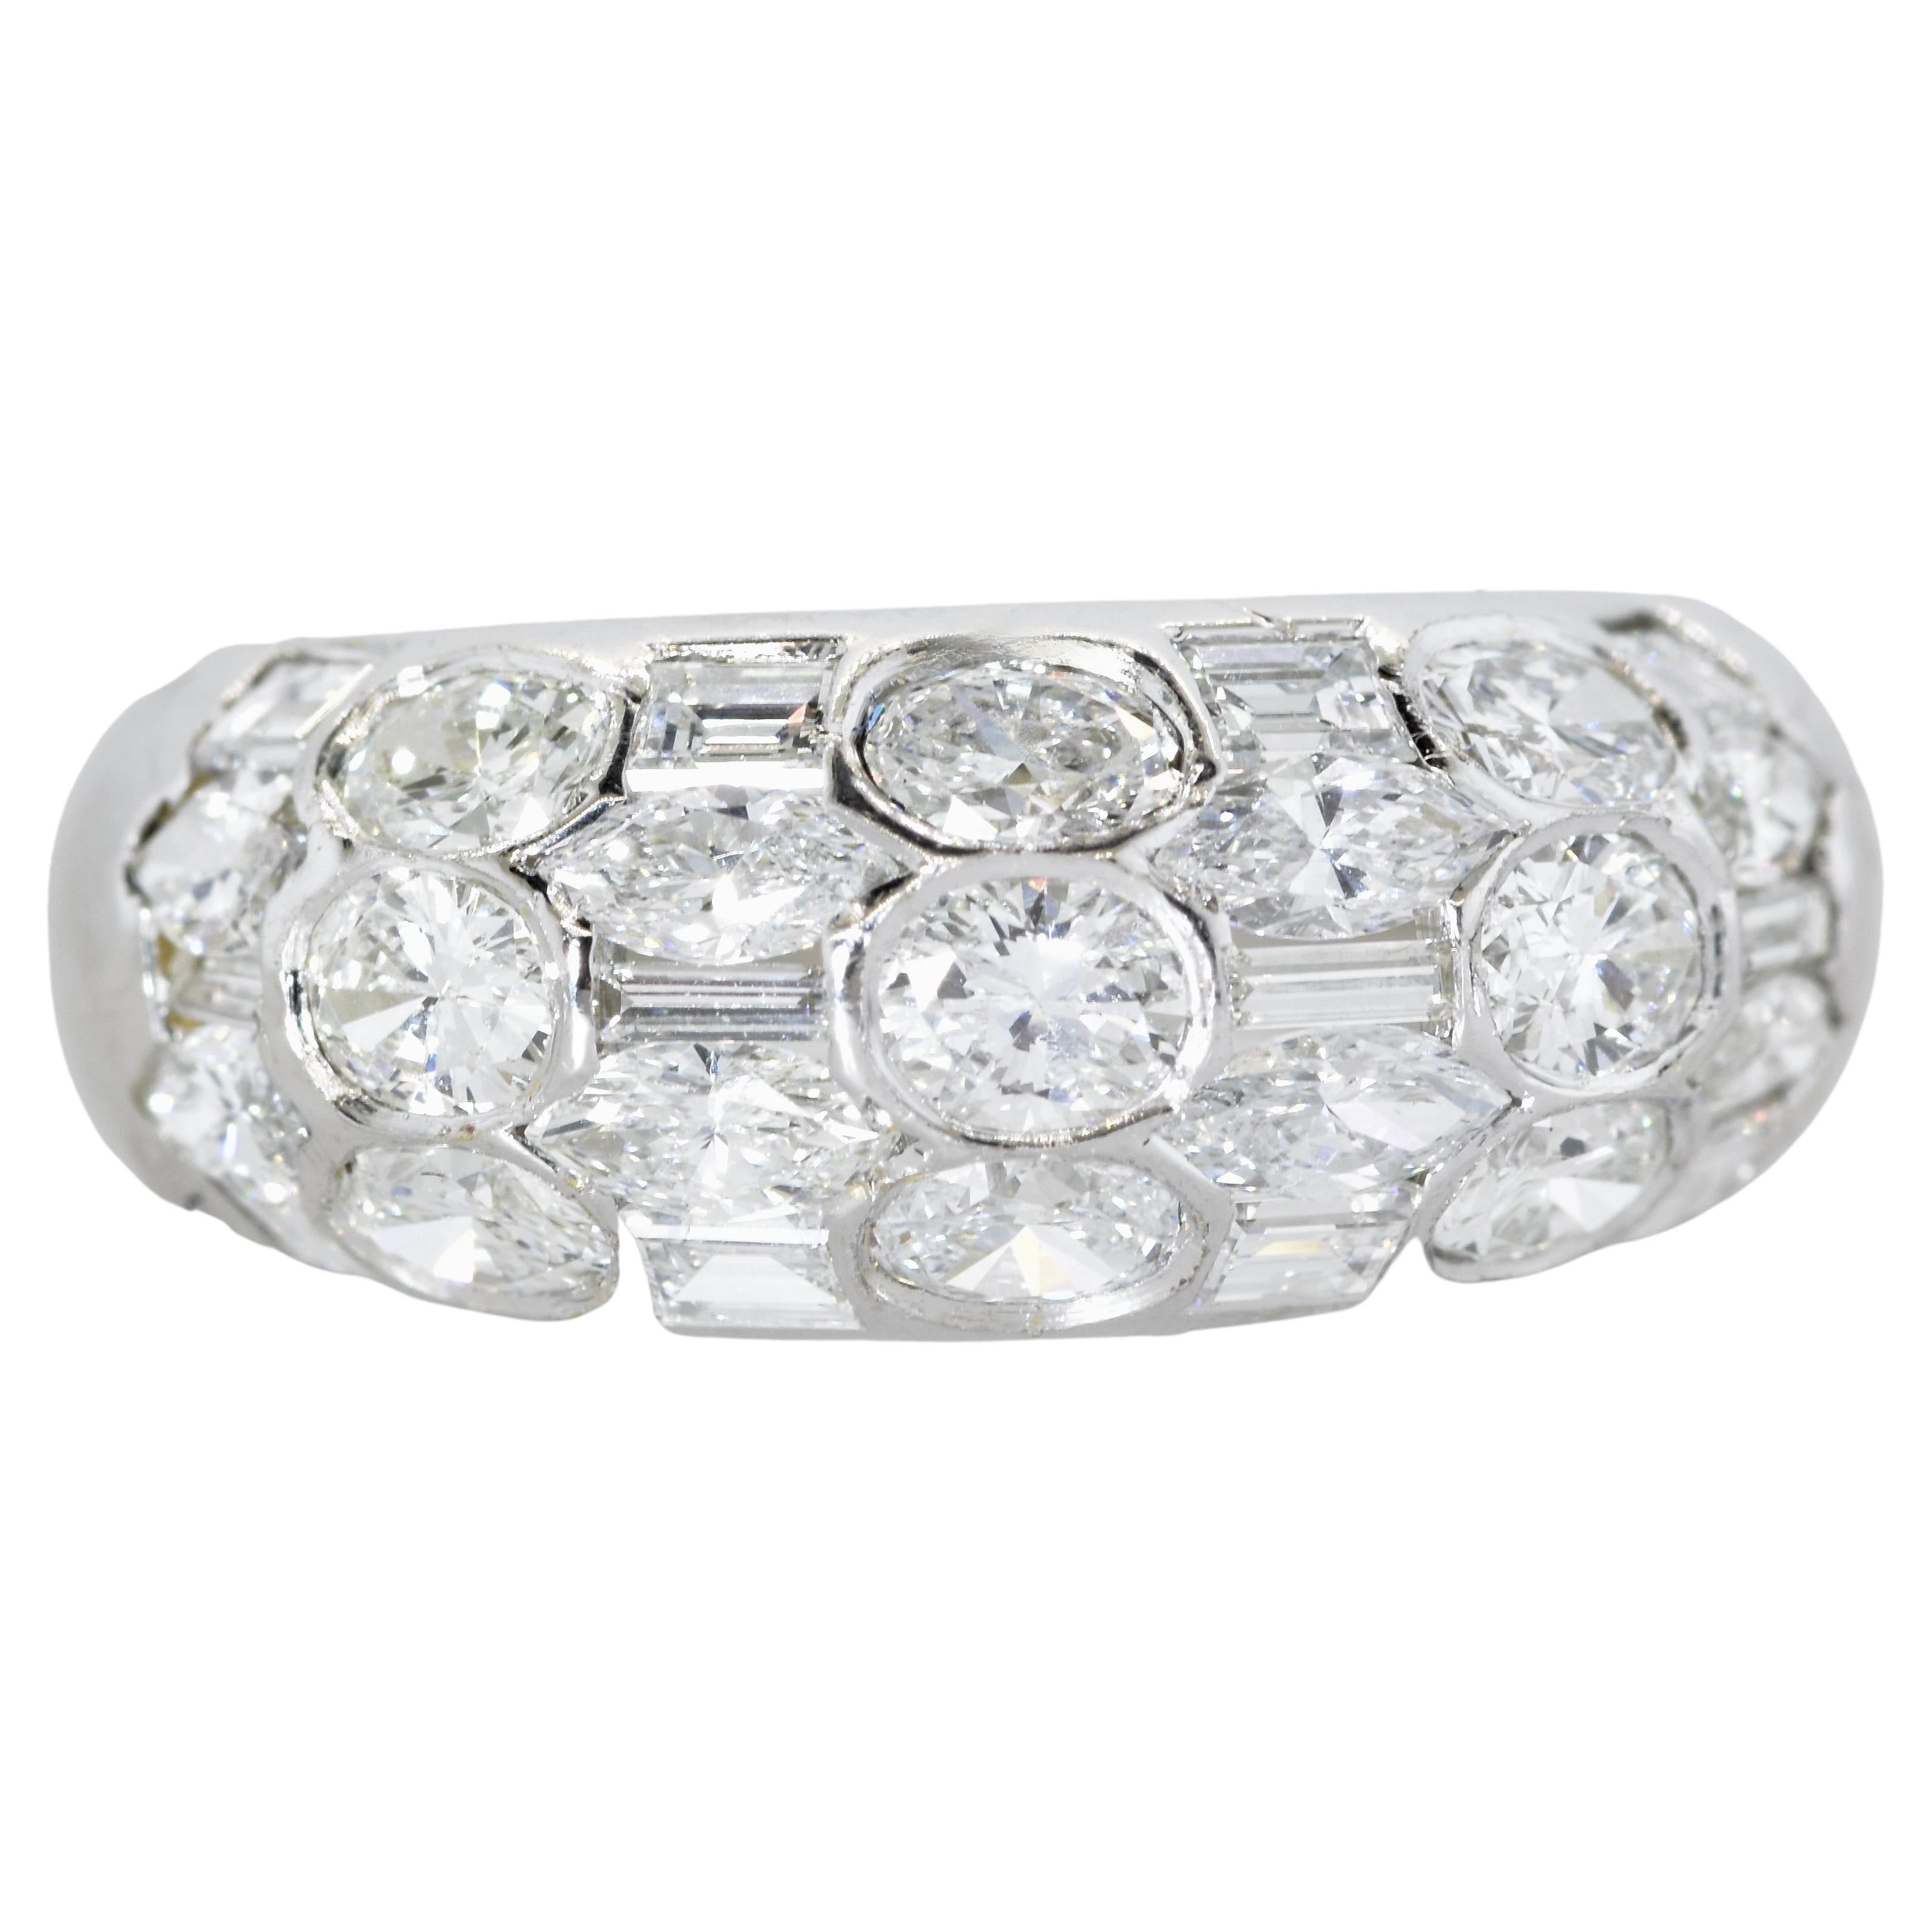 Contemporary Fancy Cut Diamond and 18K White Gold Ring